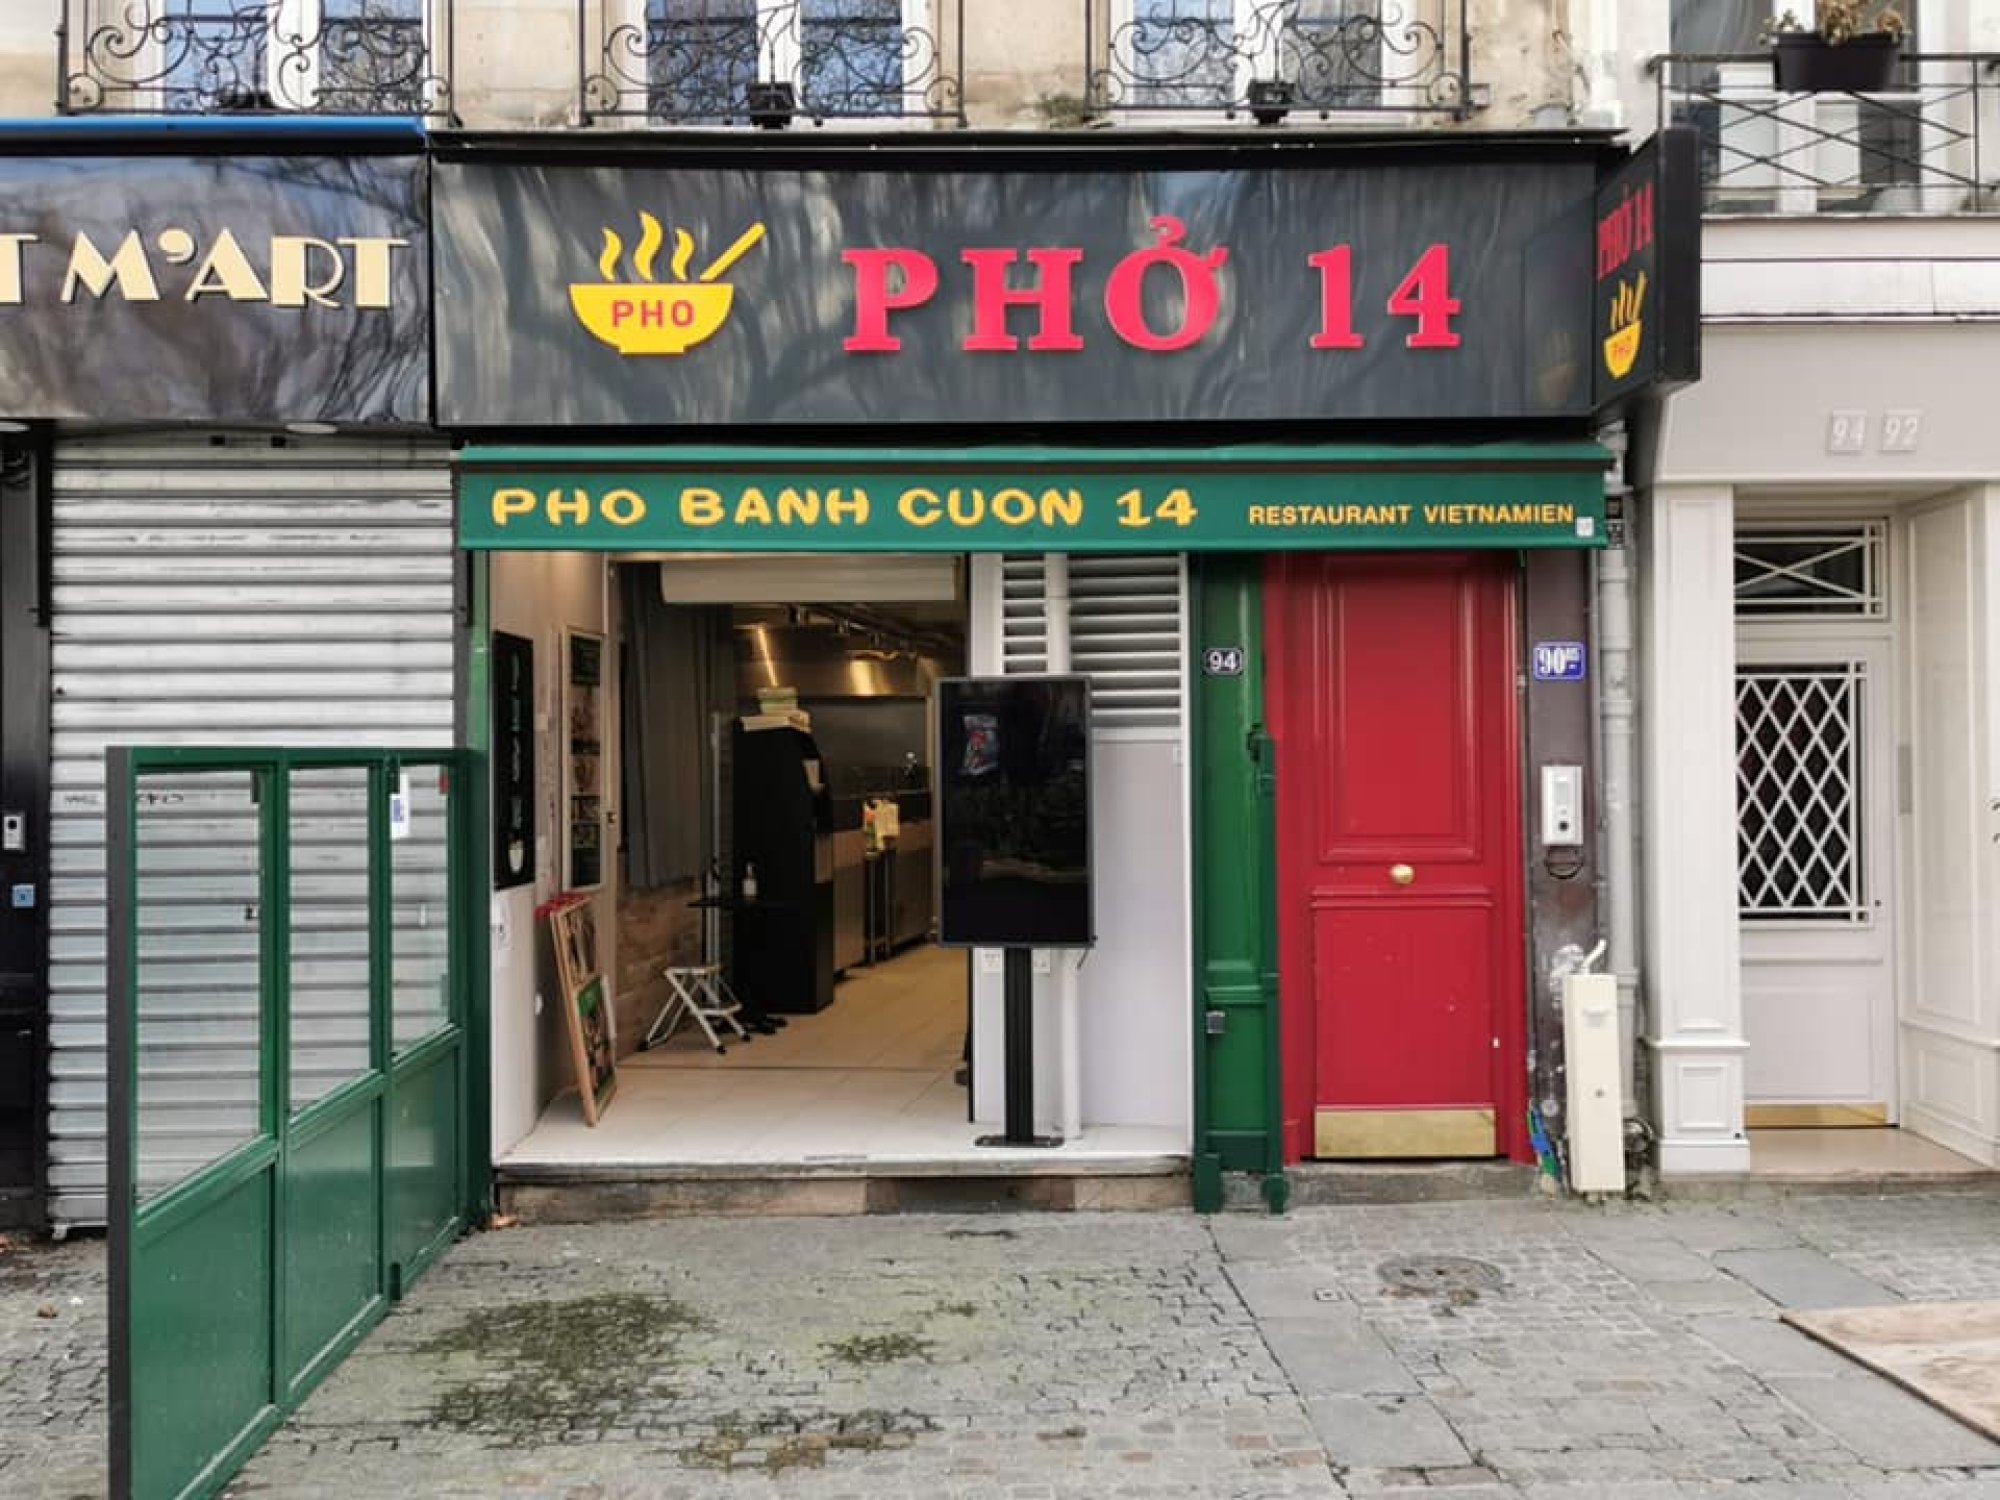 Pho In Paris Oysters In Bordeaux Places A Wine Lover And Former Restaurateur Cannot Wait To Eat At Again When Travel To Europe Is Possible South China Morning Post